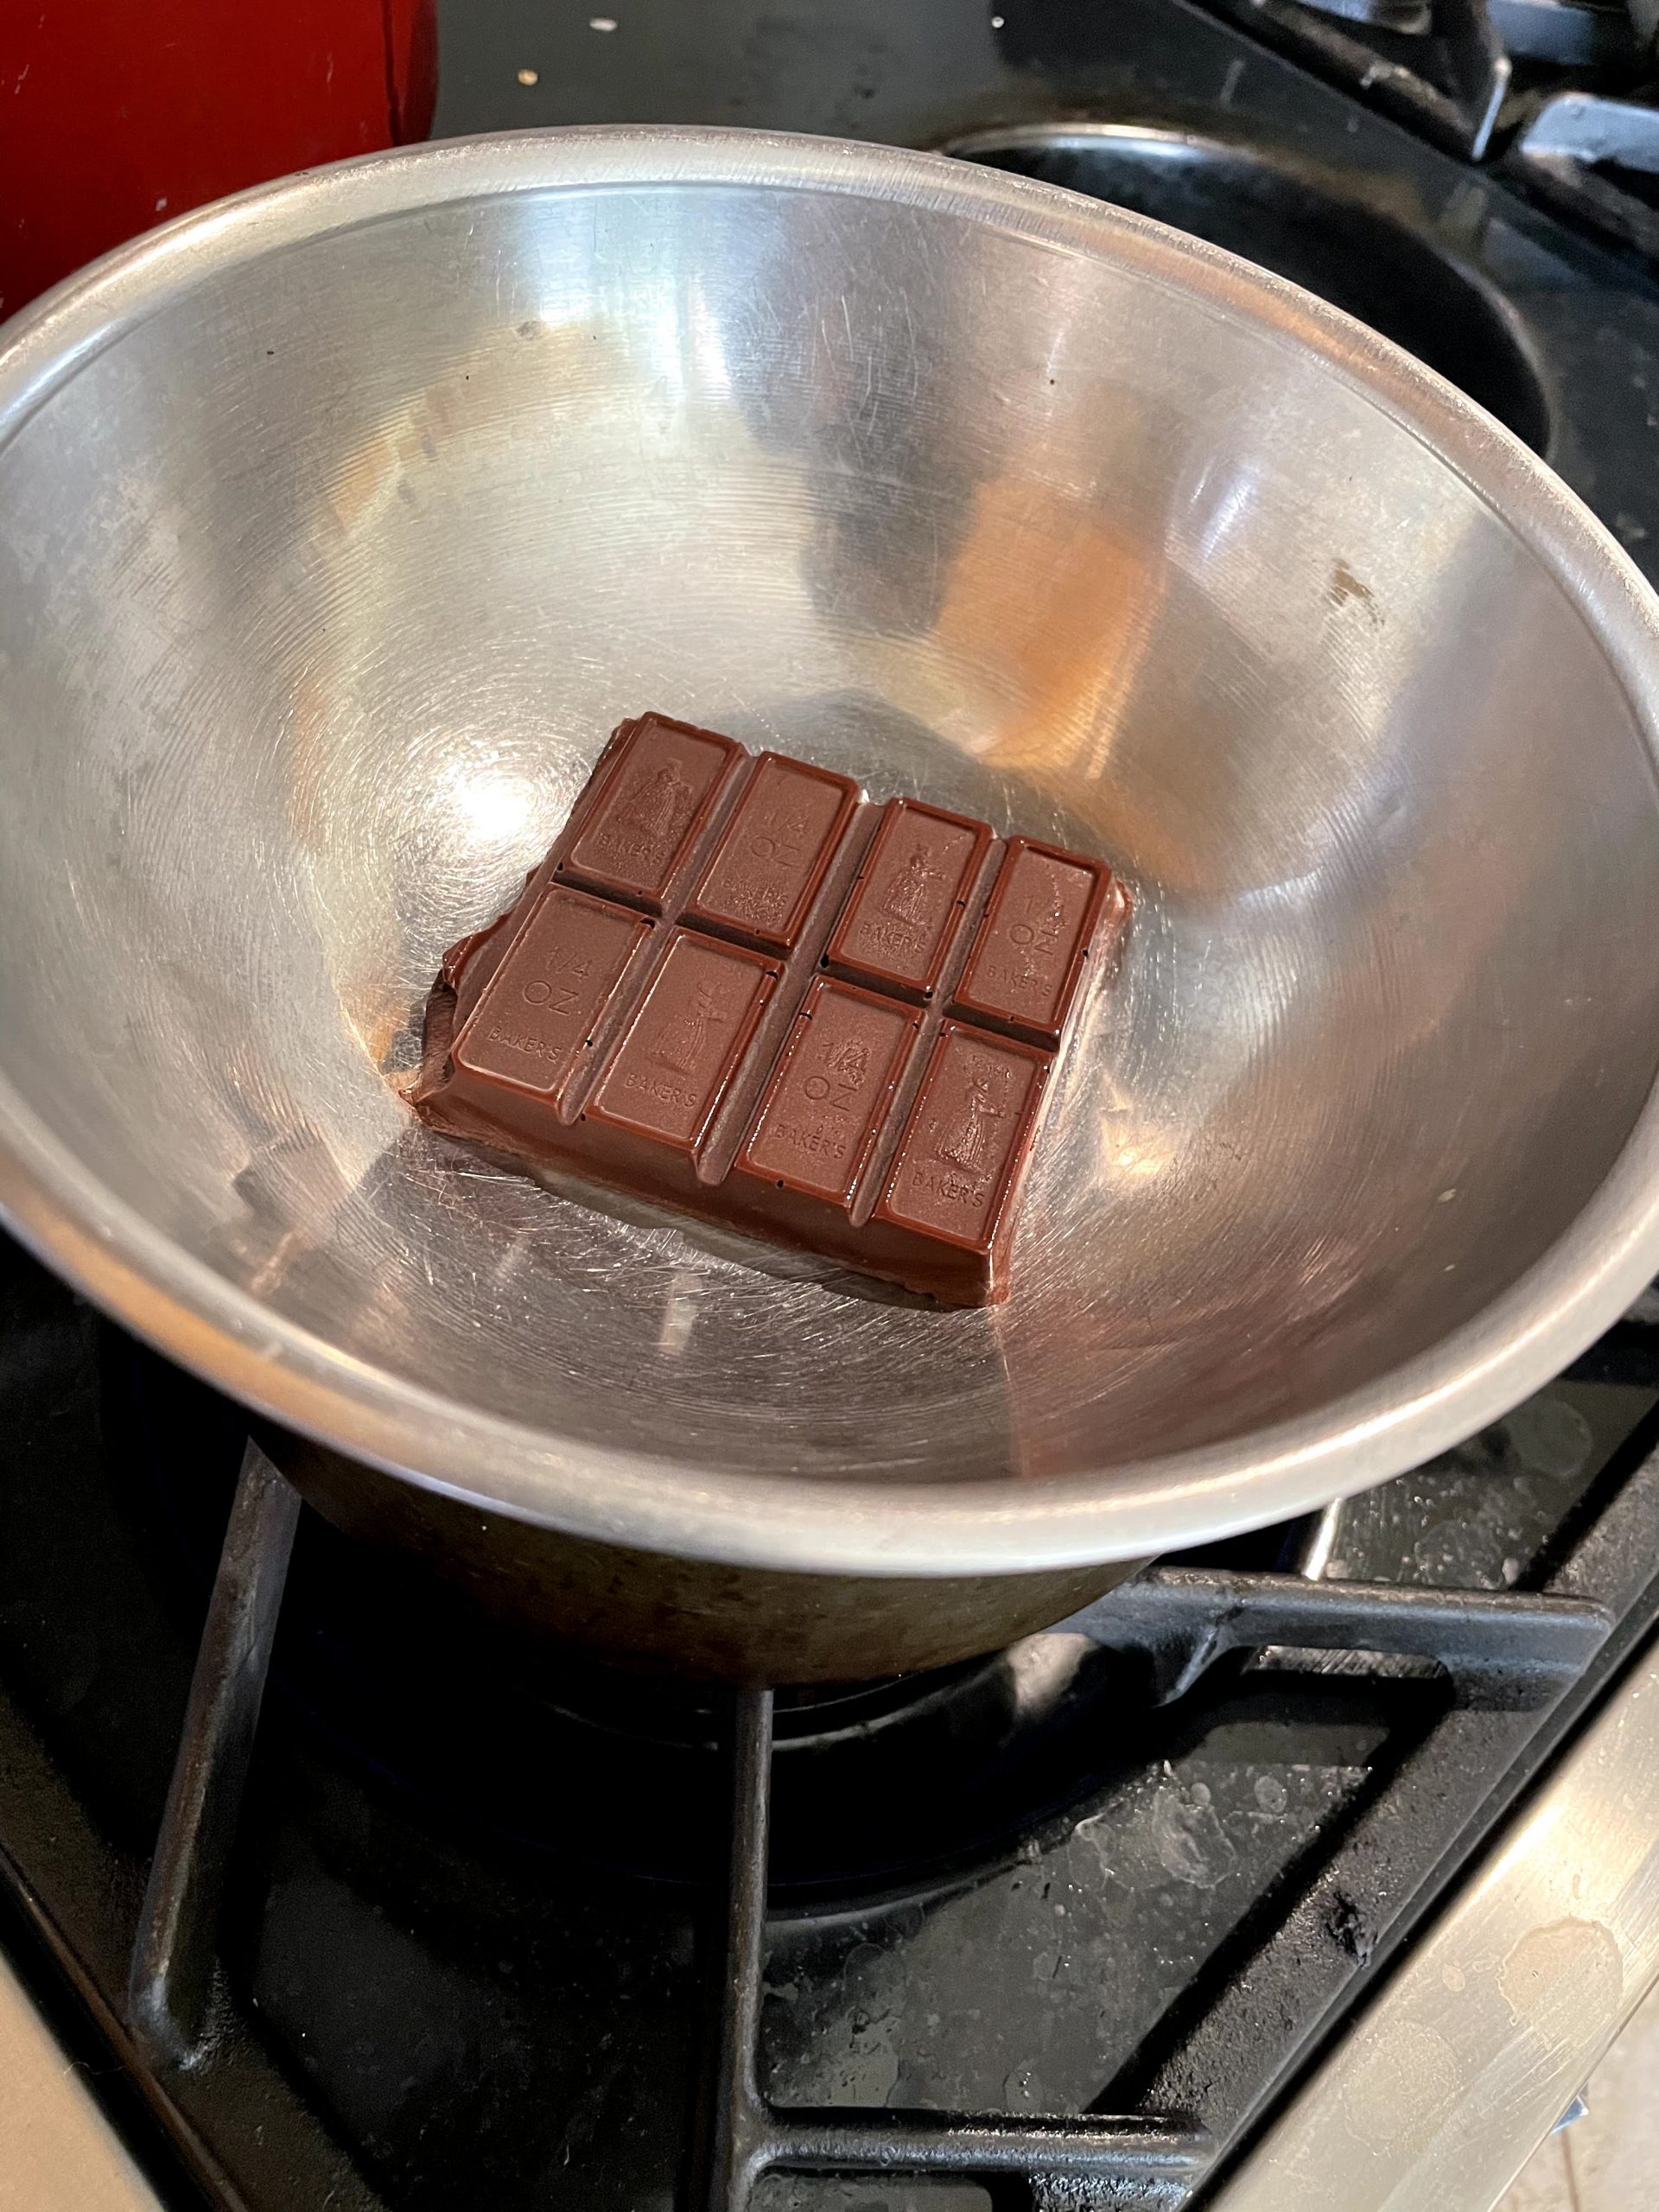 Melt bakers chocolate in a double boiler